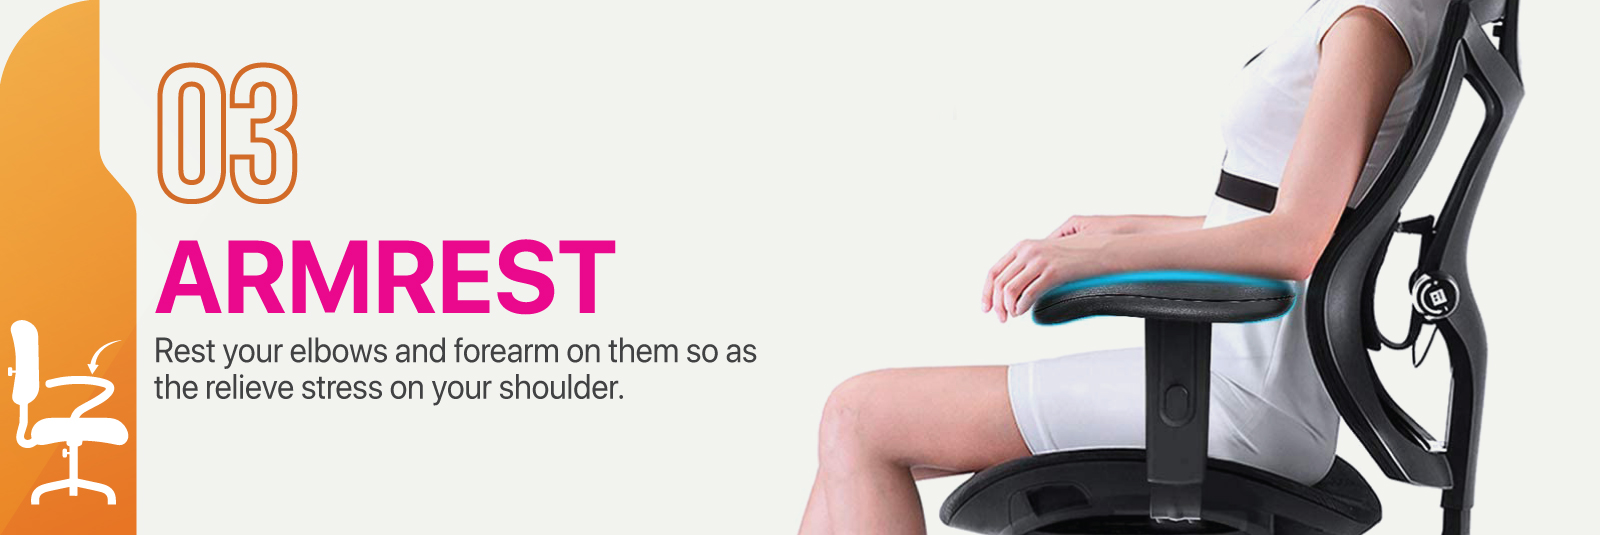 Armrest - Rest your elbows and forearm on them so as the relieve stress on your shoulder.